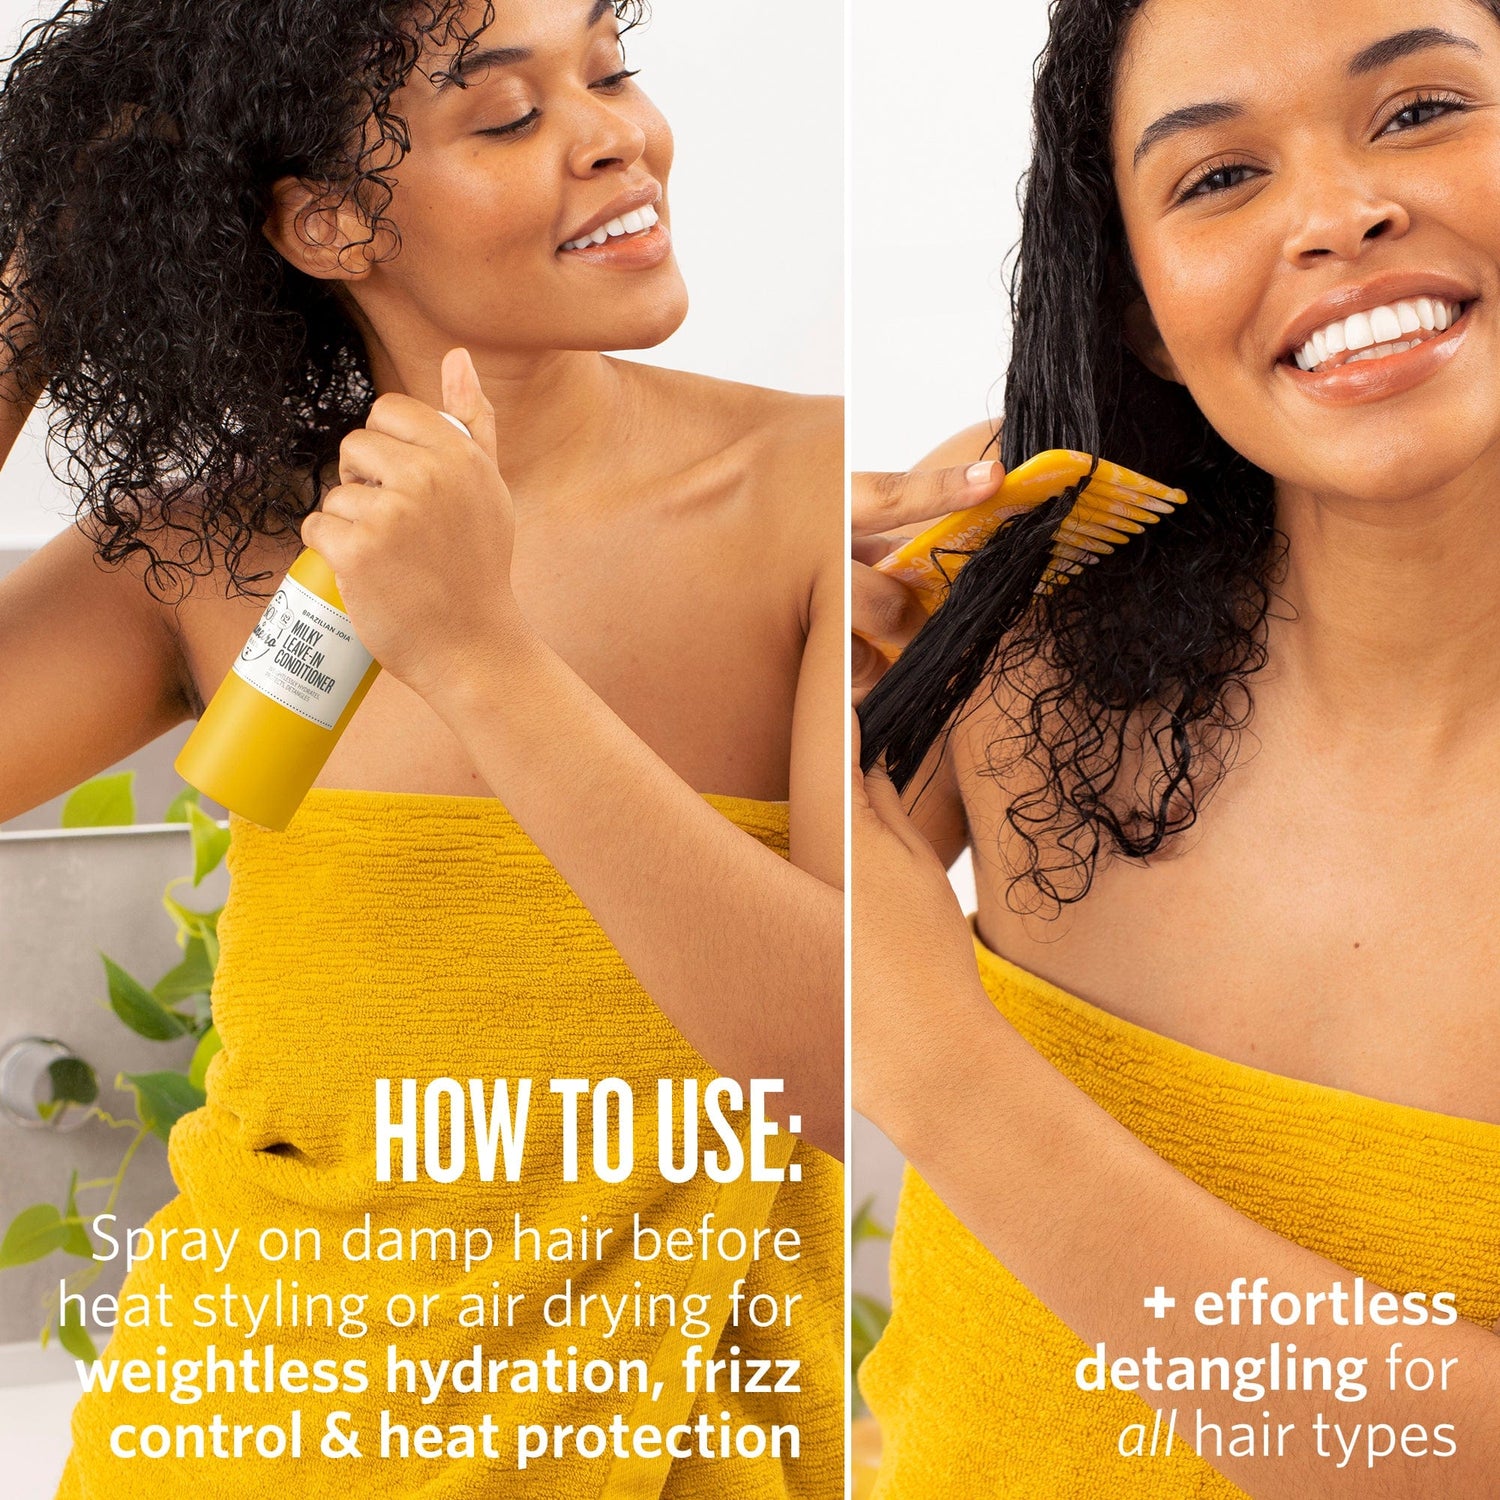 How to use: Spray on damp hair before heat styling or air drying for wieghtless hydration, frizz control &amp; heat protection |+ effortless detangling for all hair types